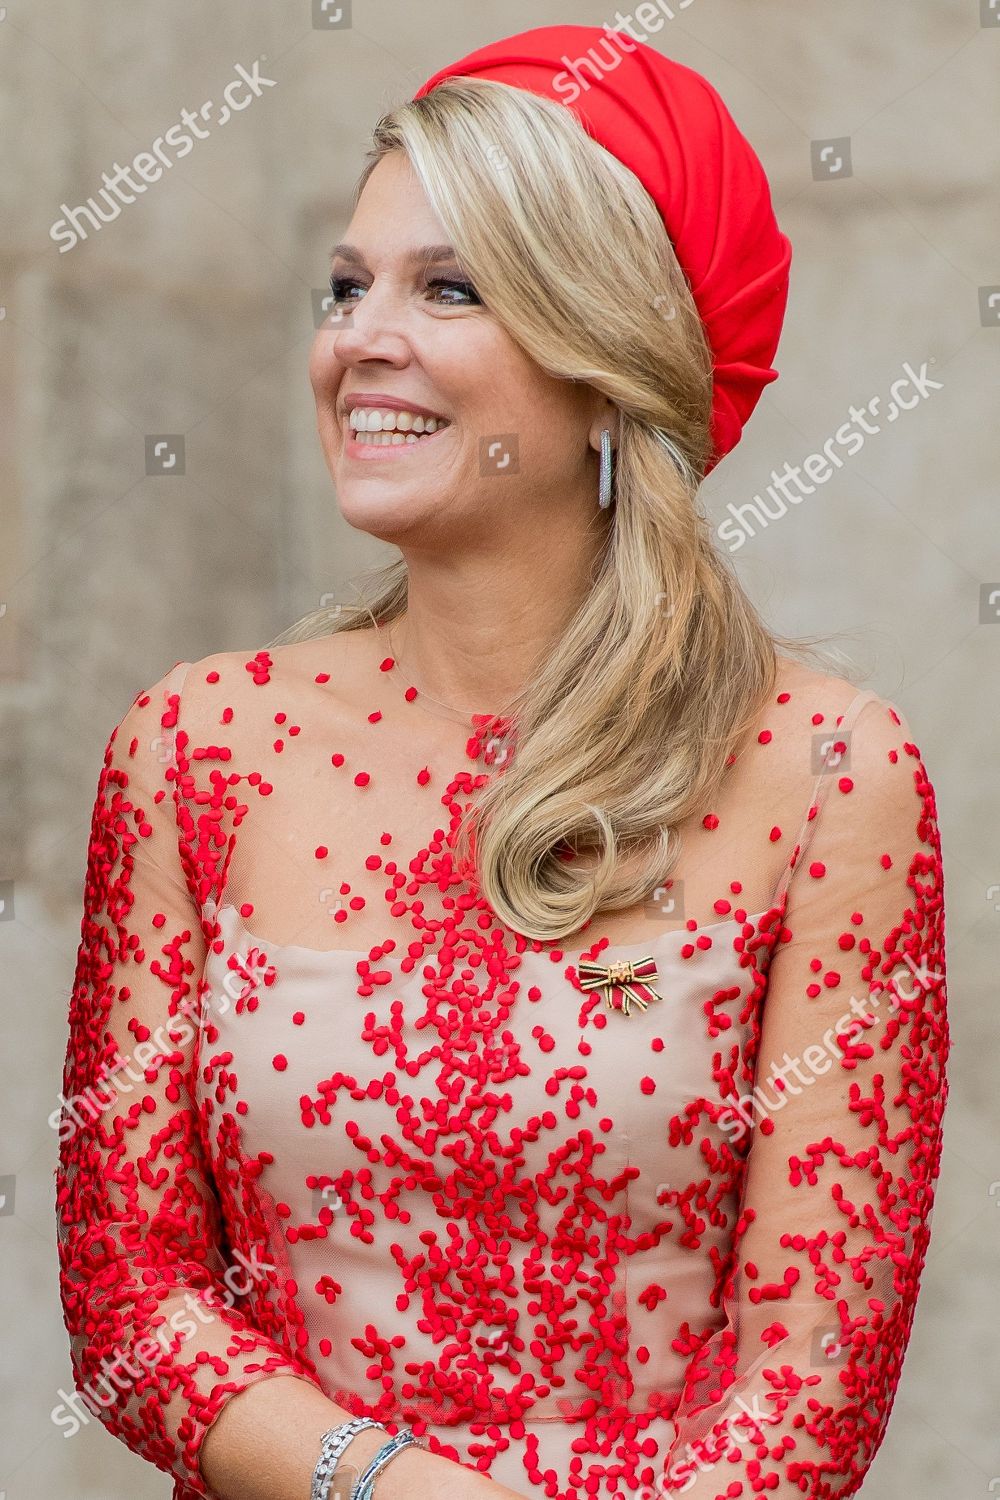 king-willem-alexander-and-queen-maxima-visit-to-germany-shutterstock-editorial-9924632ah.jpg